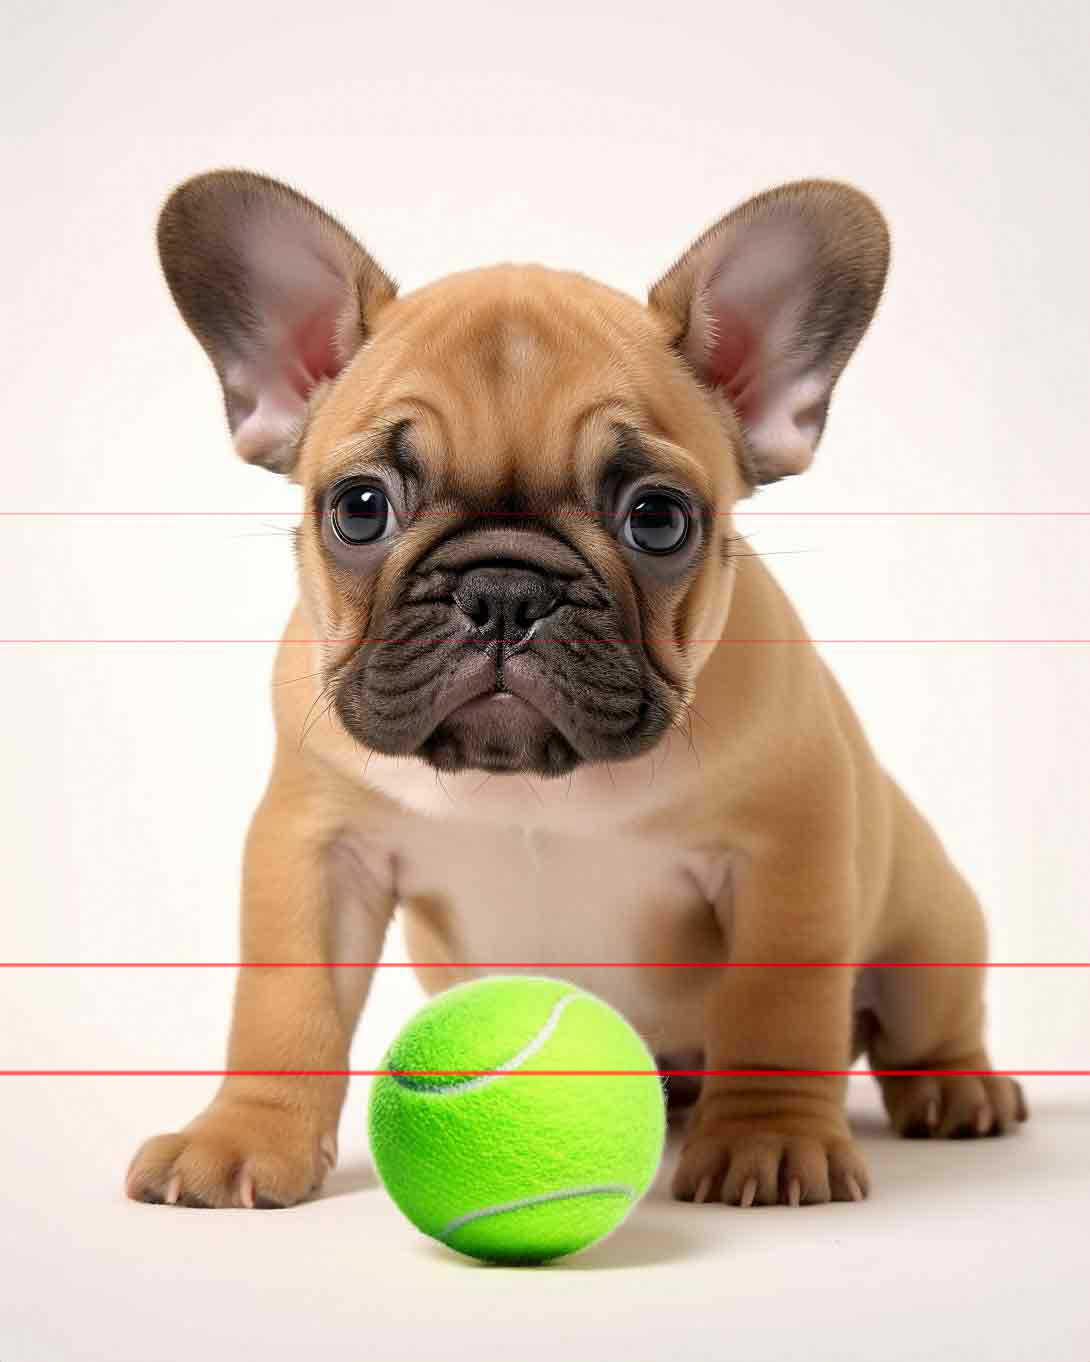 In this picture, a small tan French Bulldog puppy with a quizical expression on its wrinkled face sits on a white studio backdrop. In front of the puppy is a bright green tennis ball which is 1/4 of the puppies height emphasizing how small it is.